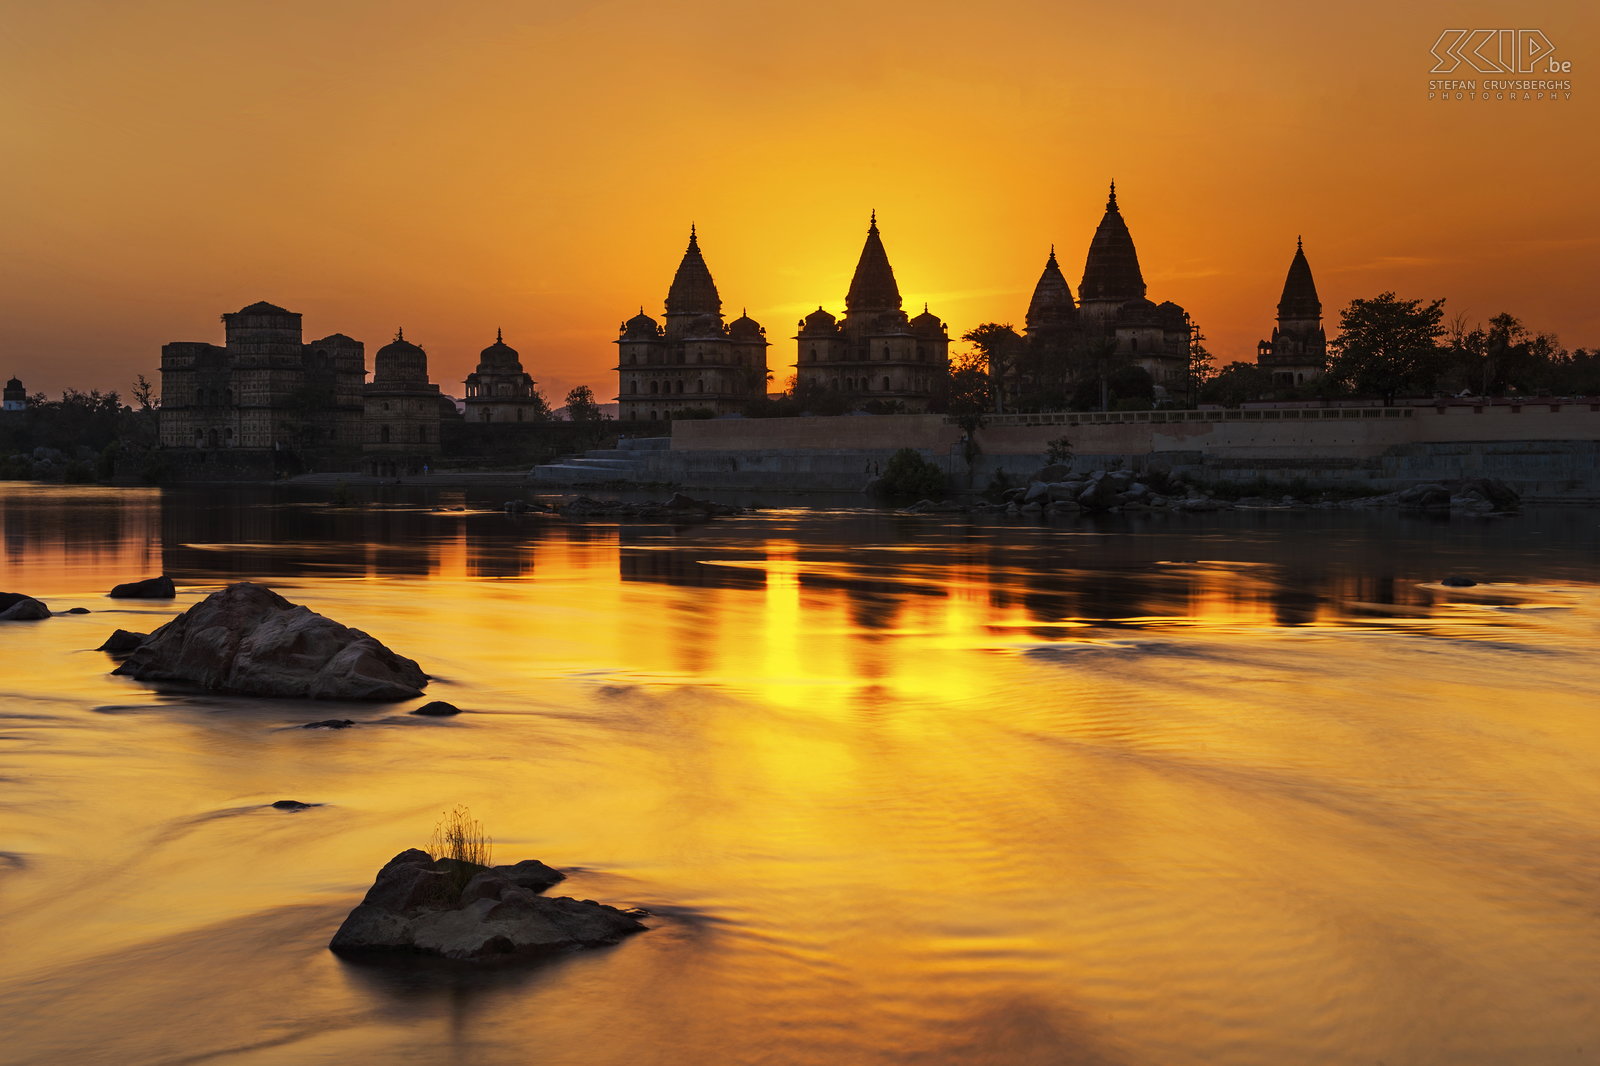 Orchha - Sunset at Betwa river unset at the river banks of the Betwa river in Orchha (Madhya Pradesh) with the beautiful Chhatris on the other side. These Chhatris are the tombs of the Maharajas and they were built in the 15th century. I used my ND filter to get a better reflection of the Chhatris in the water. Stefan Cruysberghs